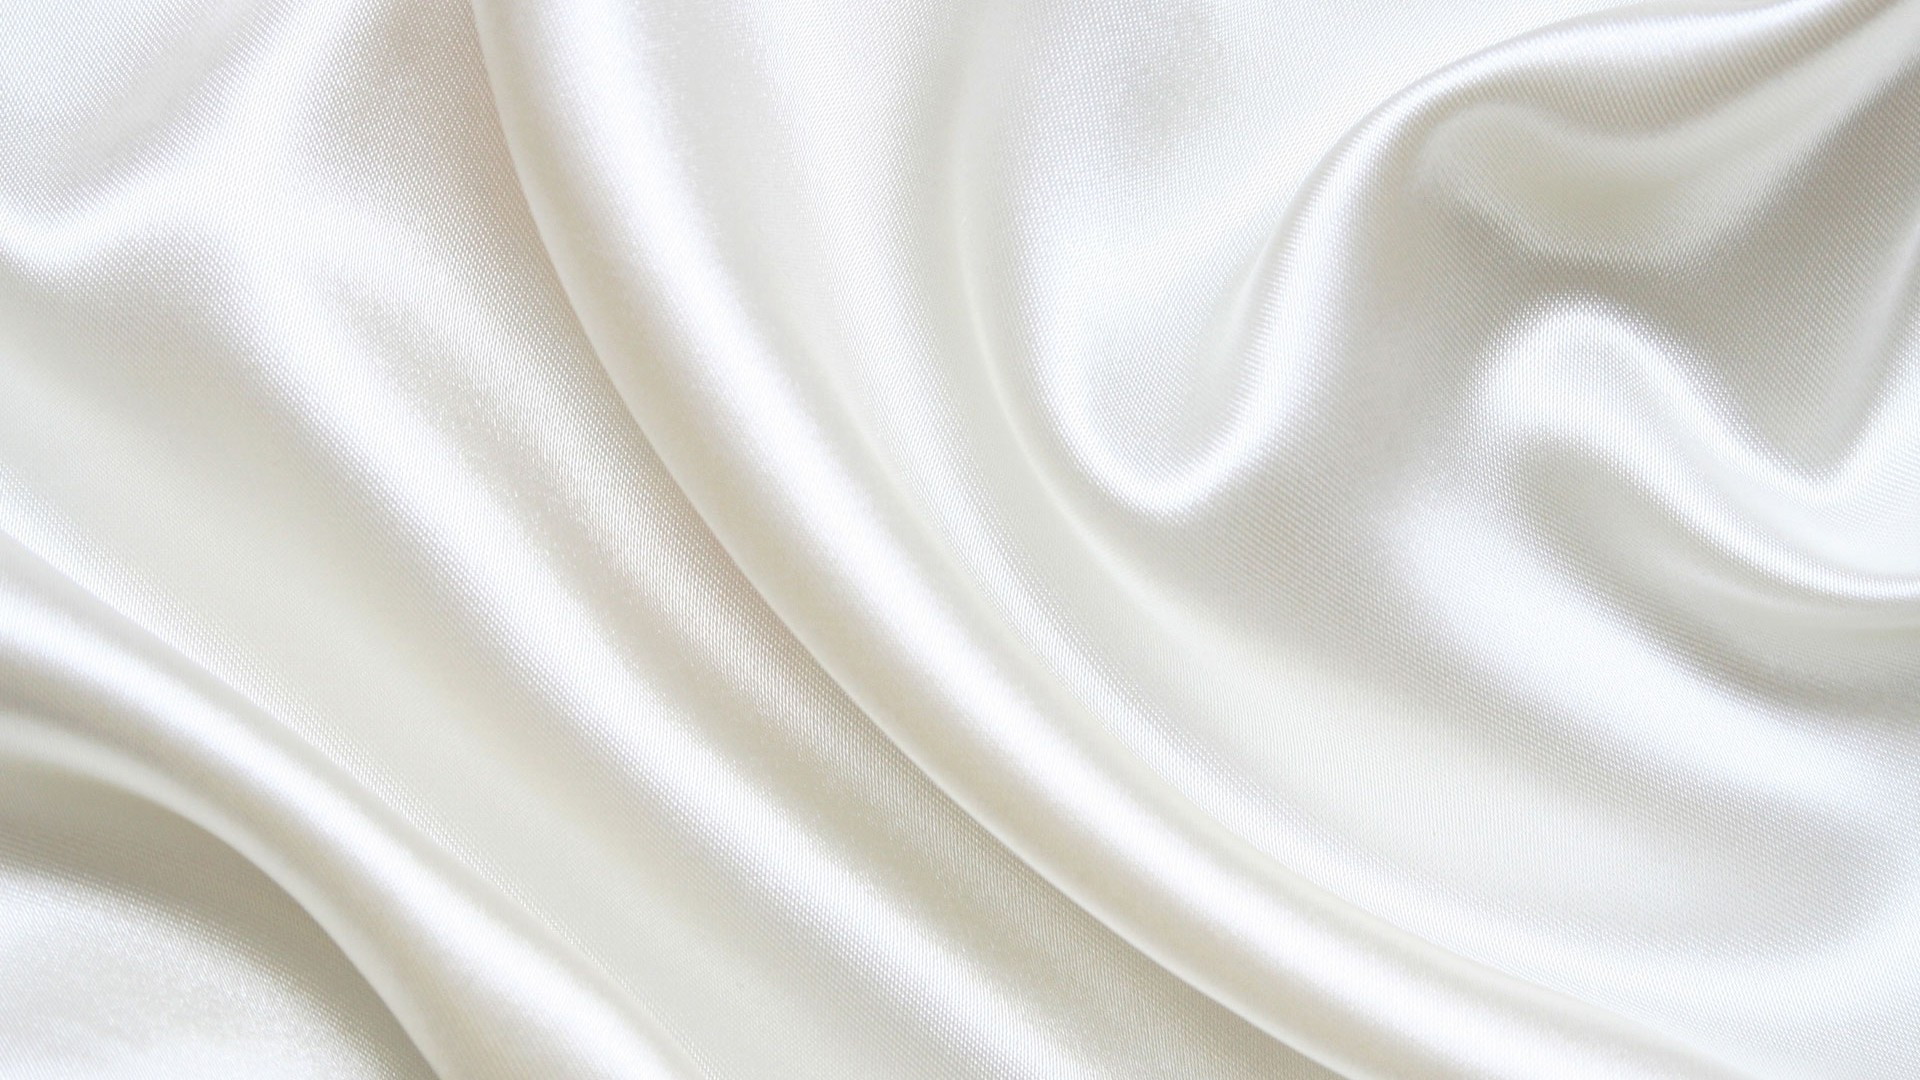 White Silk Desktop Backgrounds HD With high-resolution 1920X1080 pixel. You can use this wallpaper for your Windows and Mac OS computers as well as your Android and iPhone smartphones